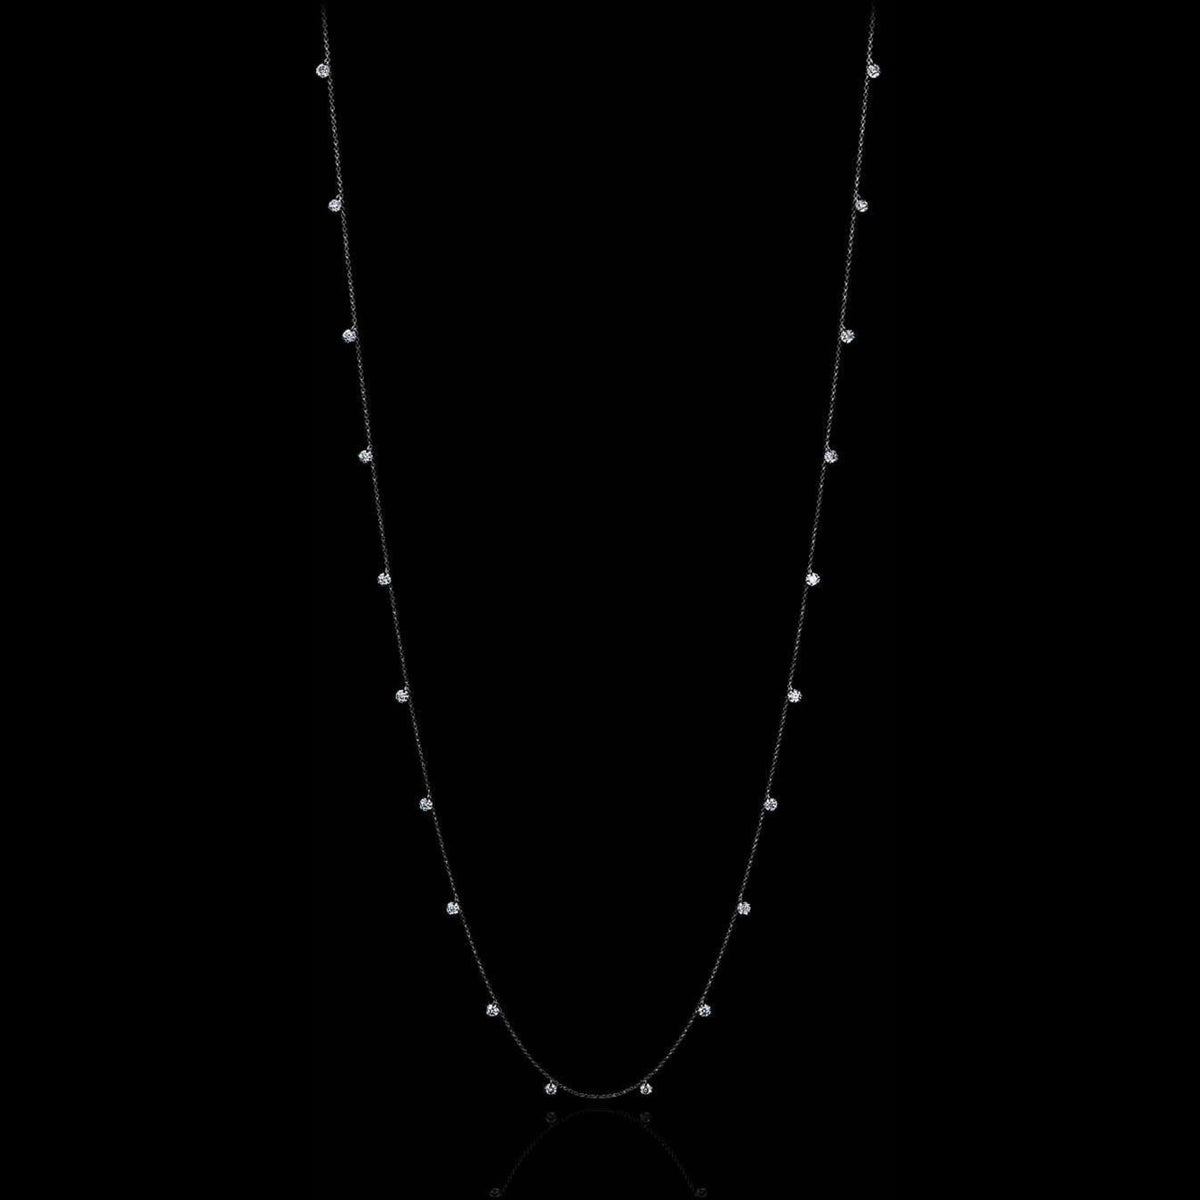 Aresa New York - Lessing No. 20 Necklaces - 18K White Gold with 3.00 cts. of Diamonds